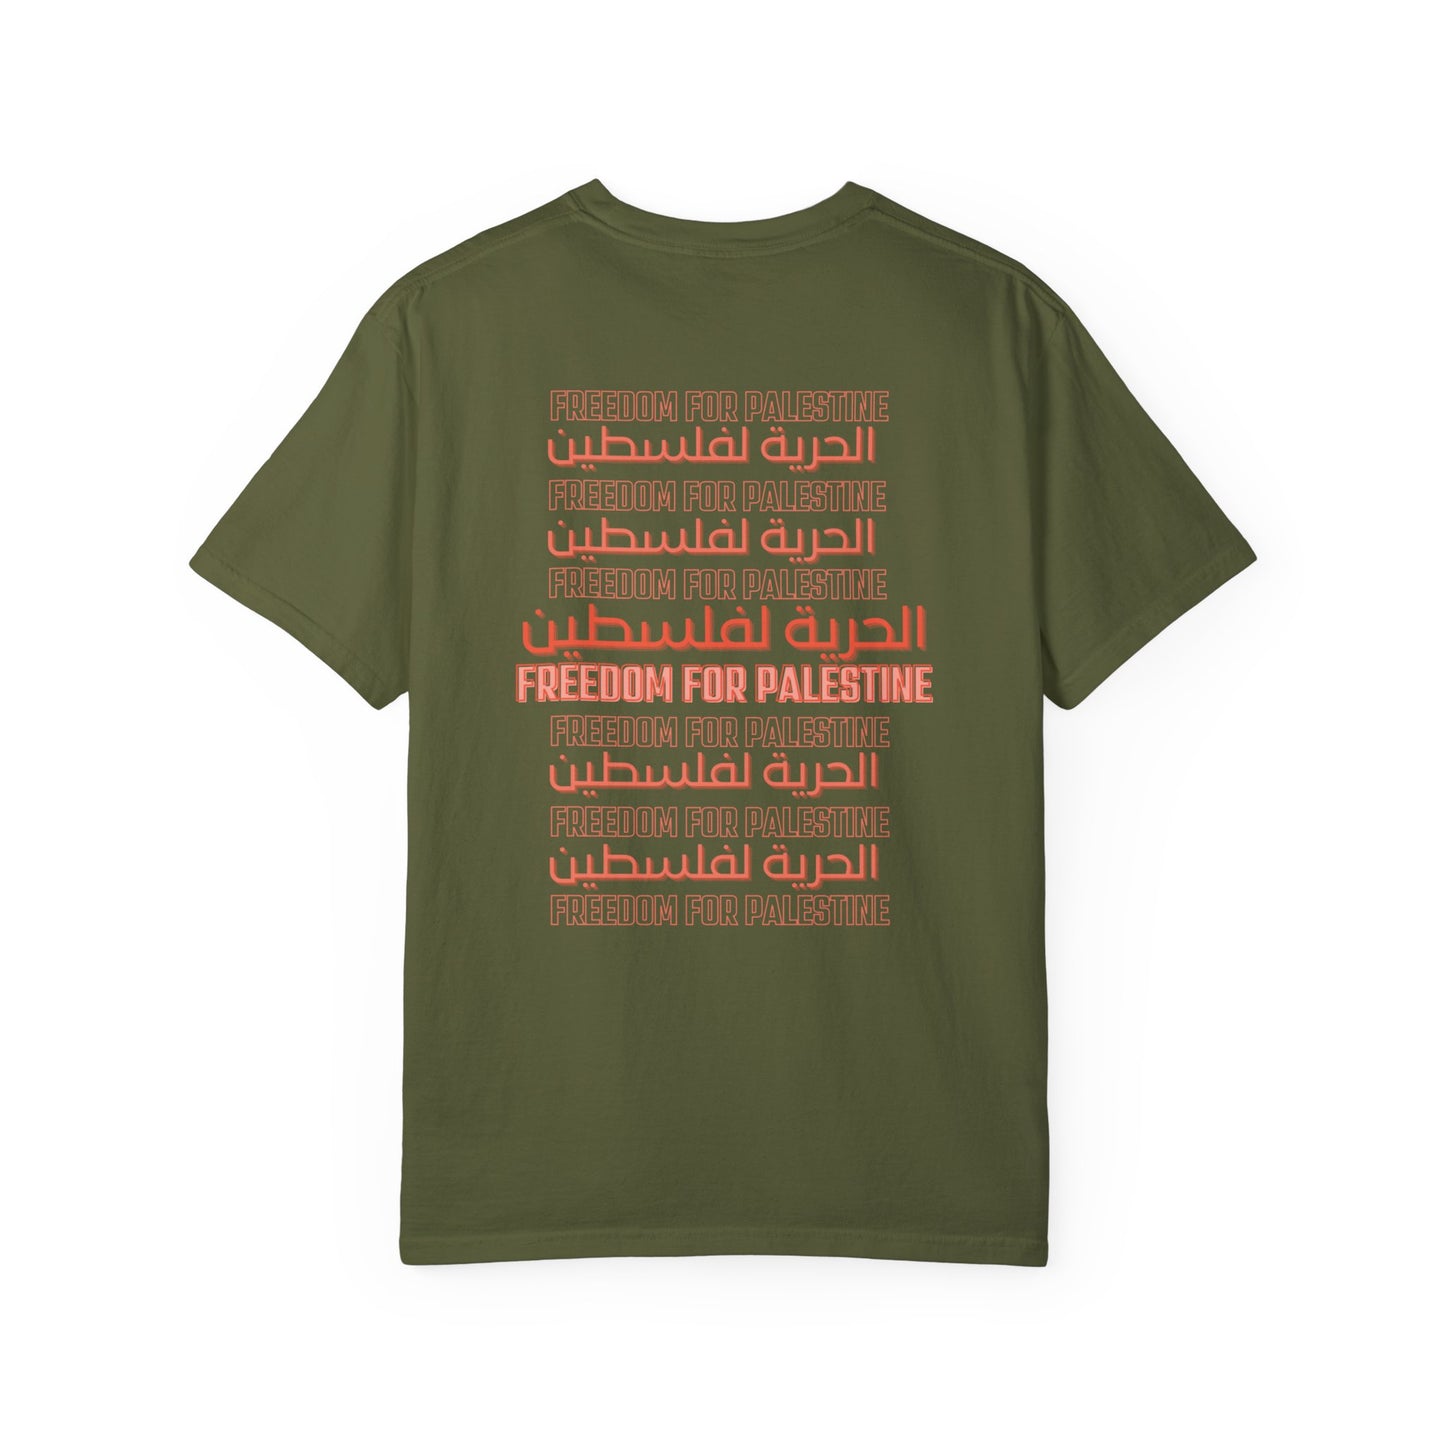 FREEDOM FOR PALESTINE - T-shirt